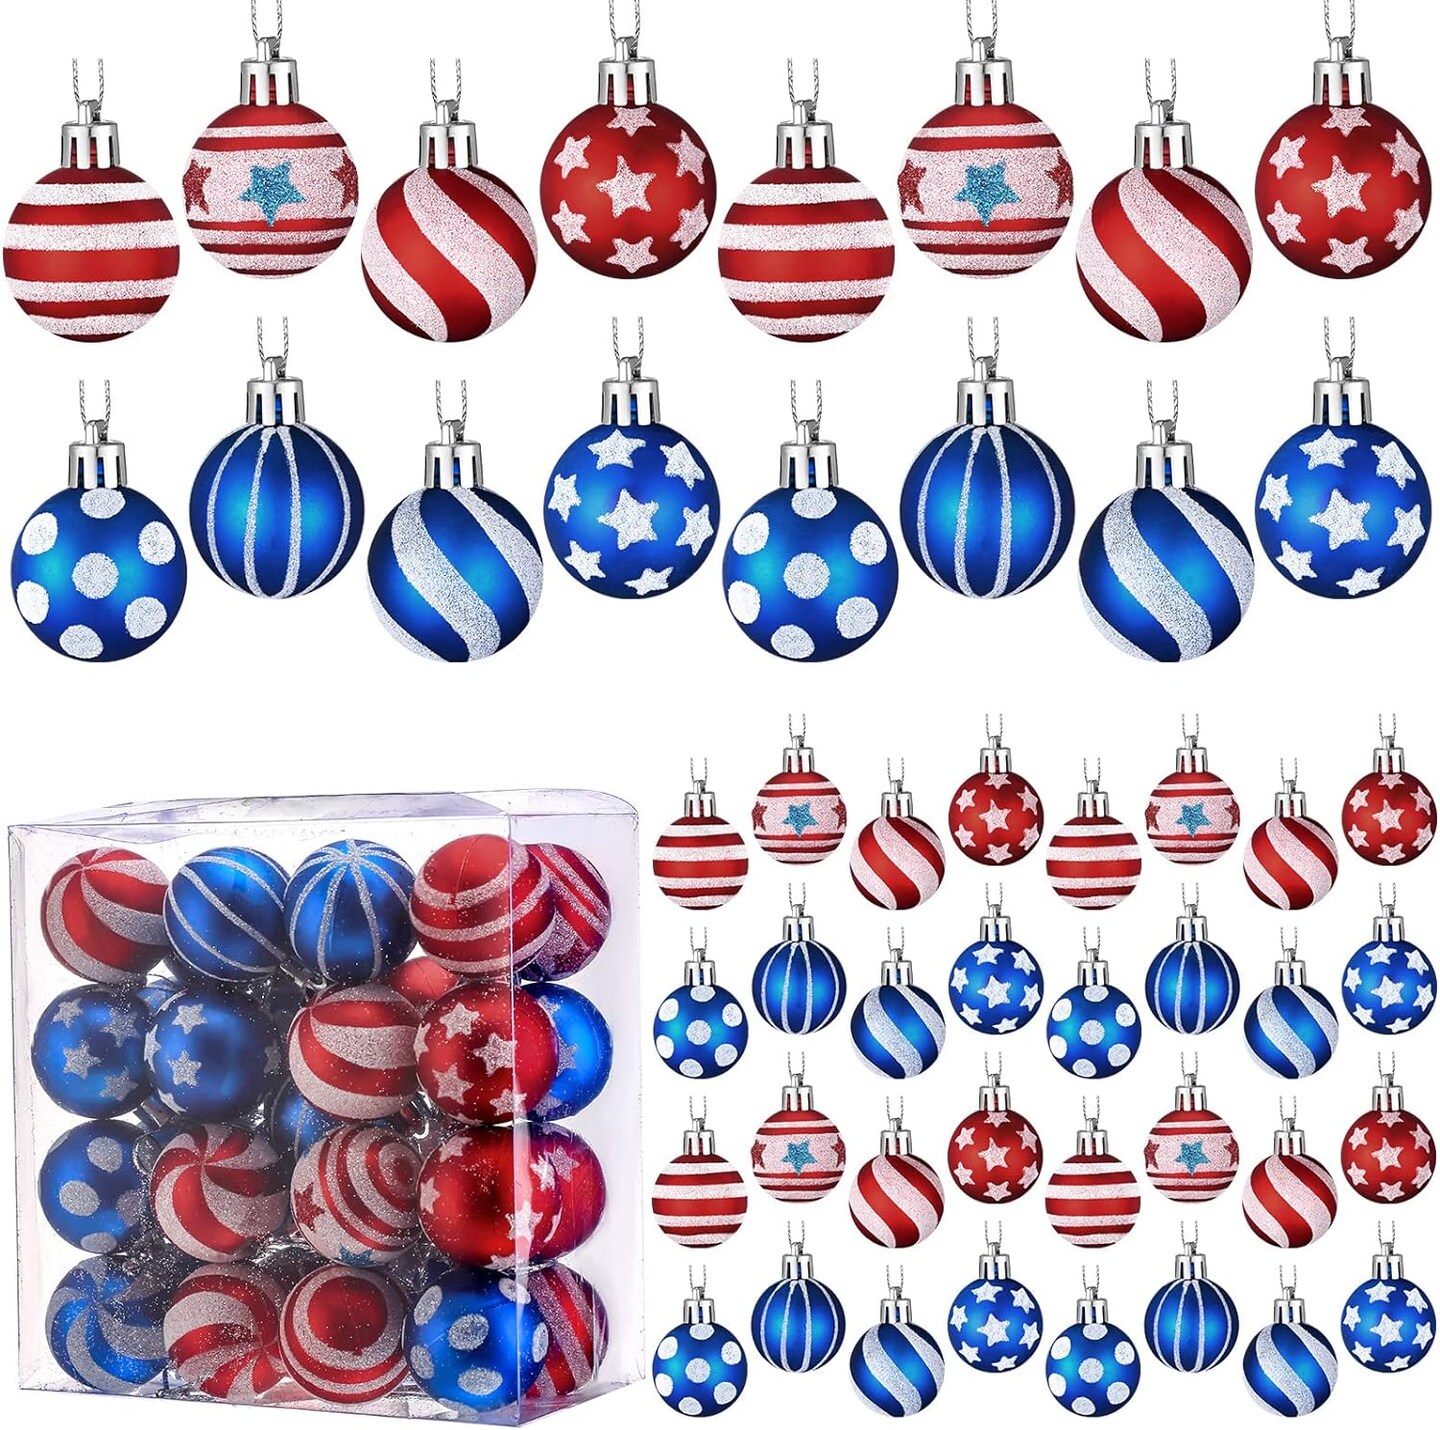 32 Pieces 4th of July Ball Ornaments Patriotic Decorations